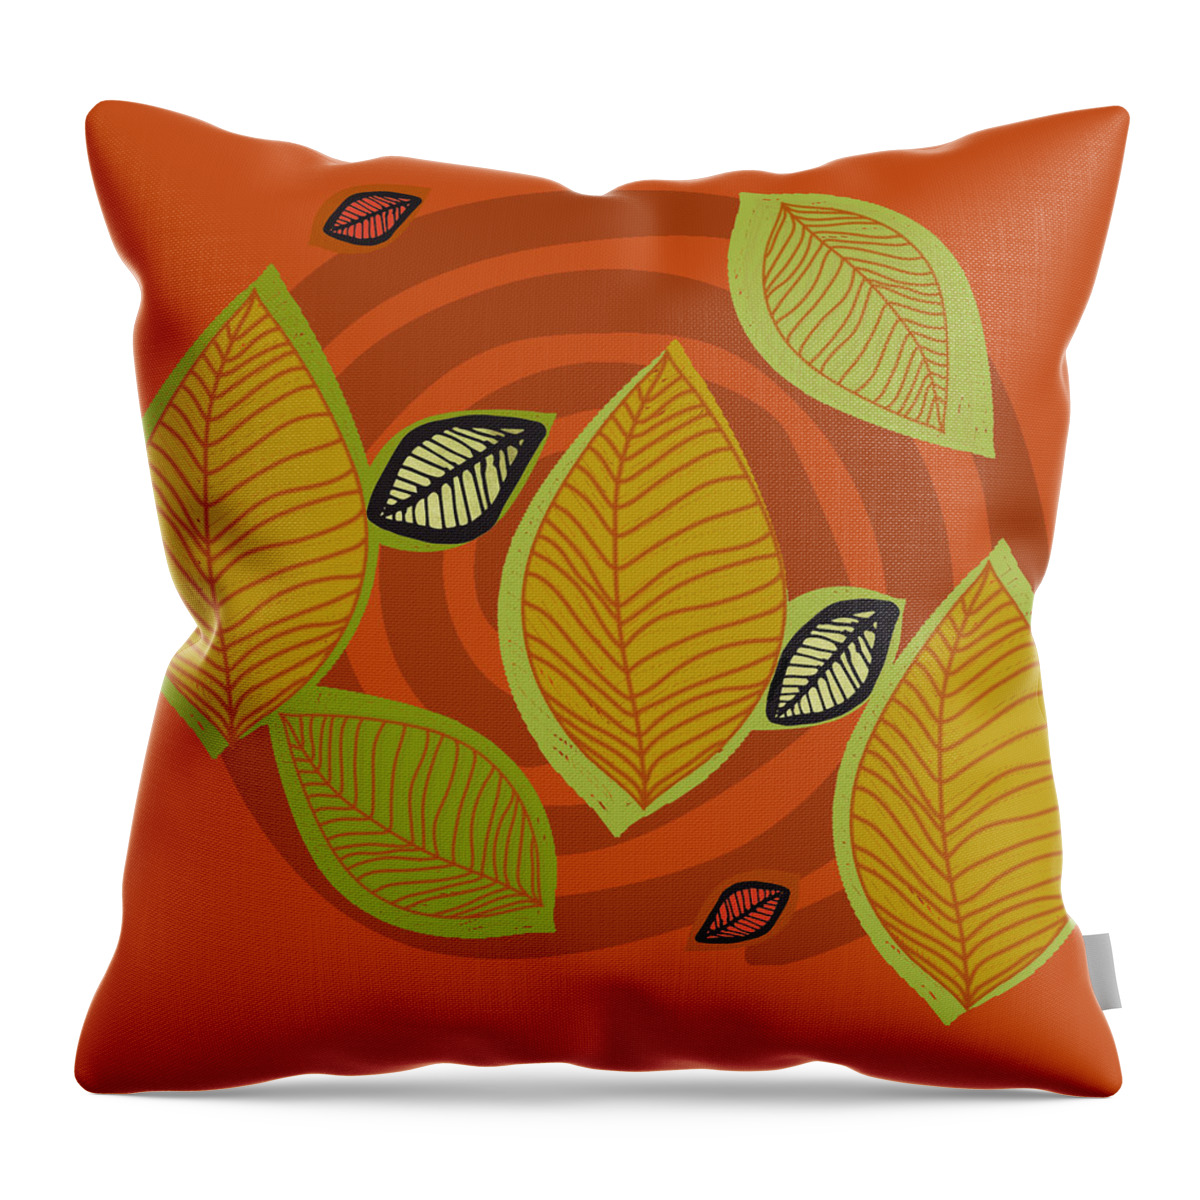 Descending Leaves Throw Pillow featuring the digital art Looking To Fall by Kandy Hurley